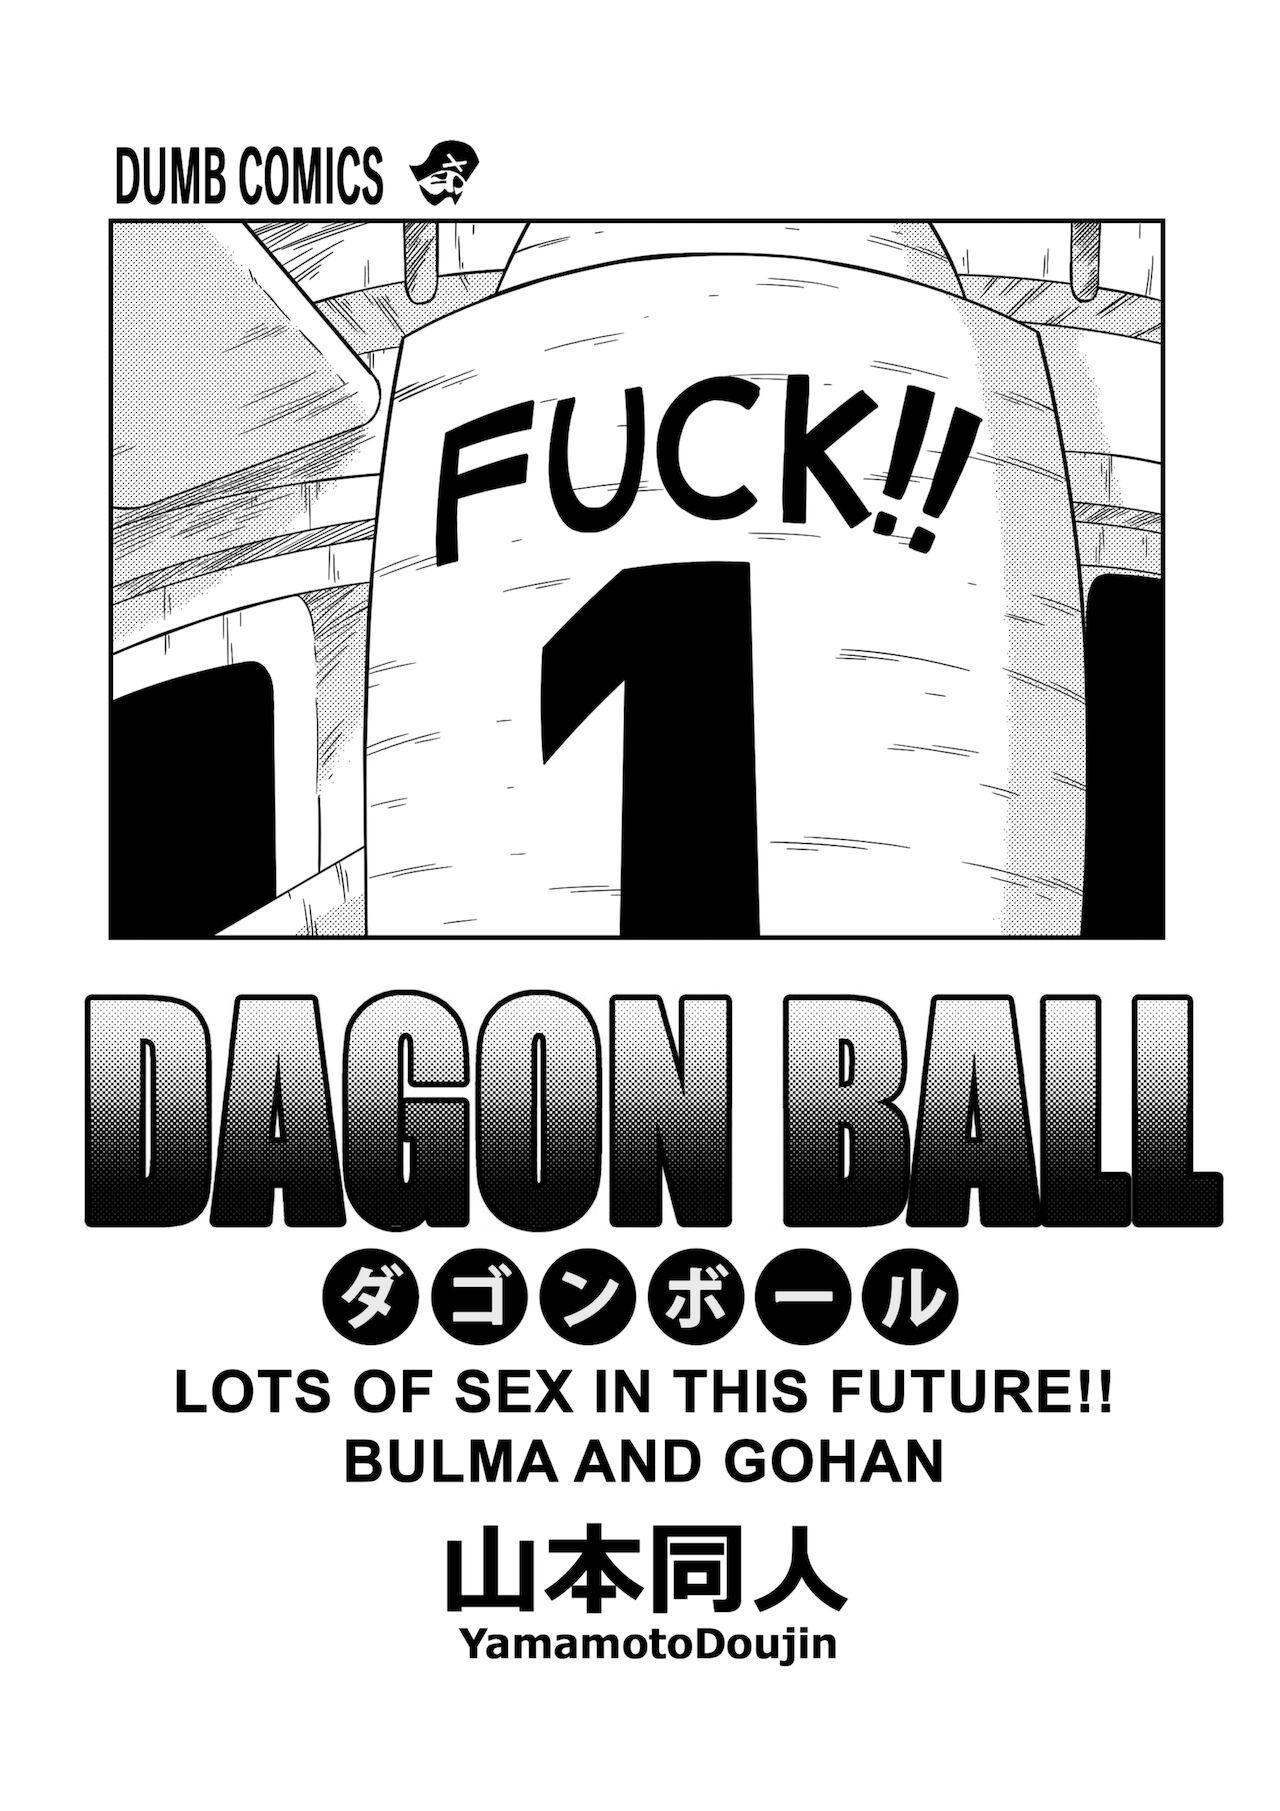 Fat Lots of Sex in this Future!! - Dragon ball z Lovers - Picture 2